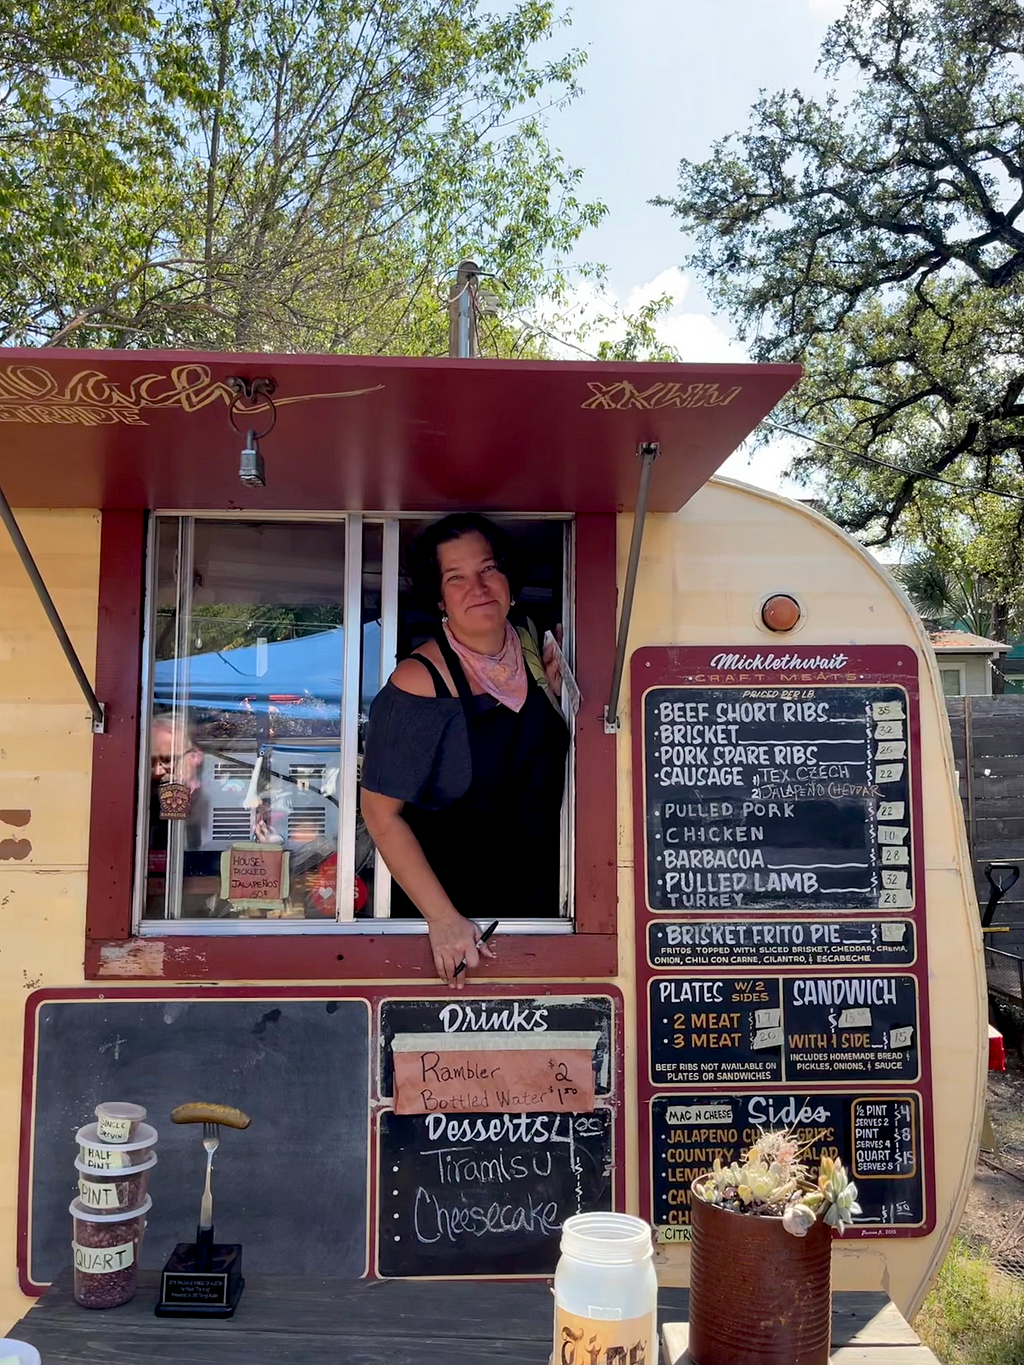 A woman smiling, leaning out of a caravan window with the menu on a blackboard next to her.